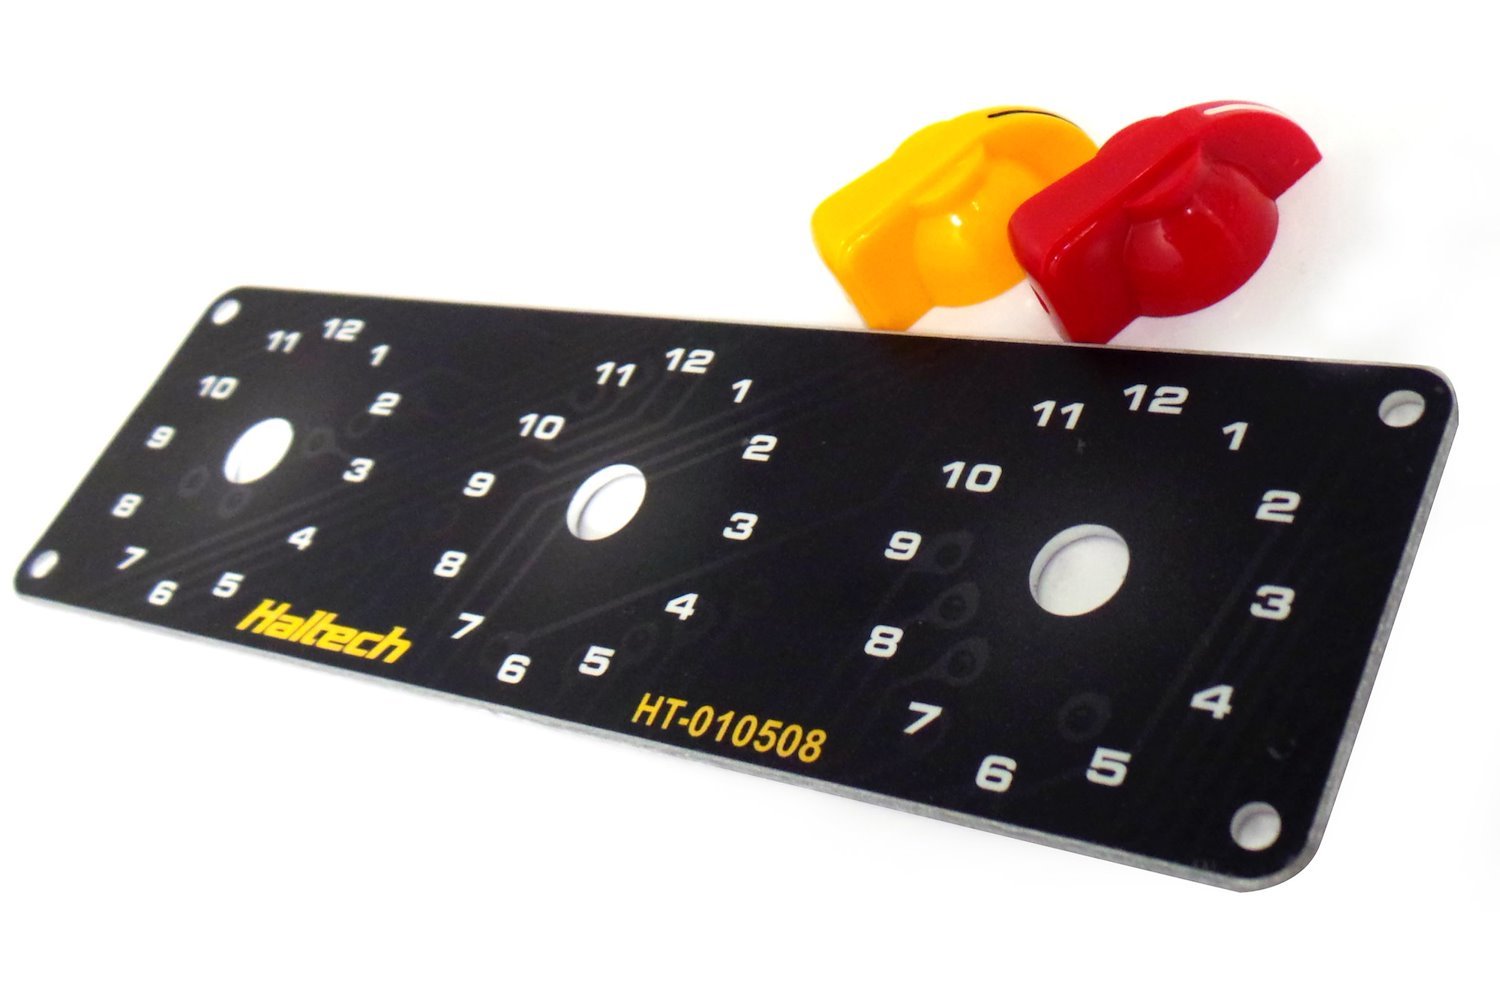 HT-010510 Triple Switch Panel Kit, Includes Yellow & Red Knobs